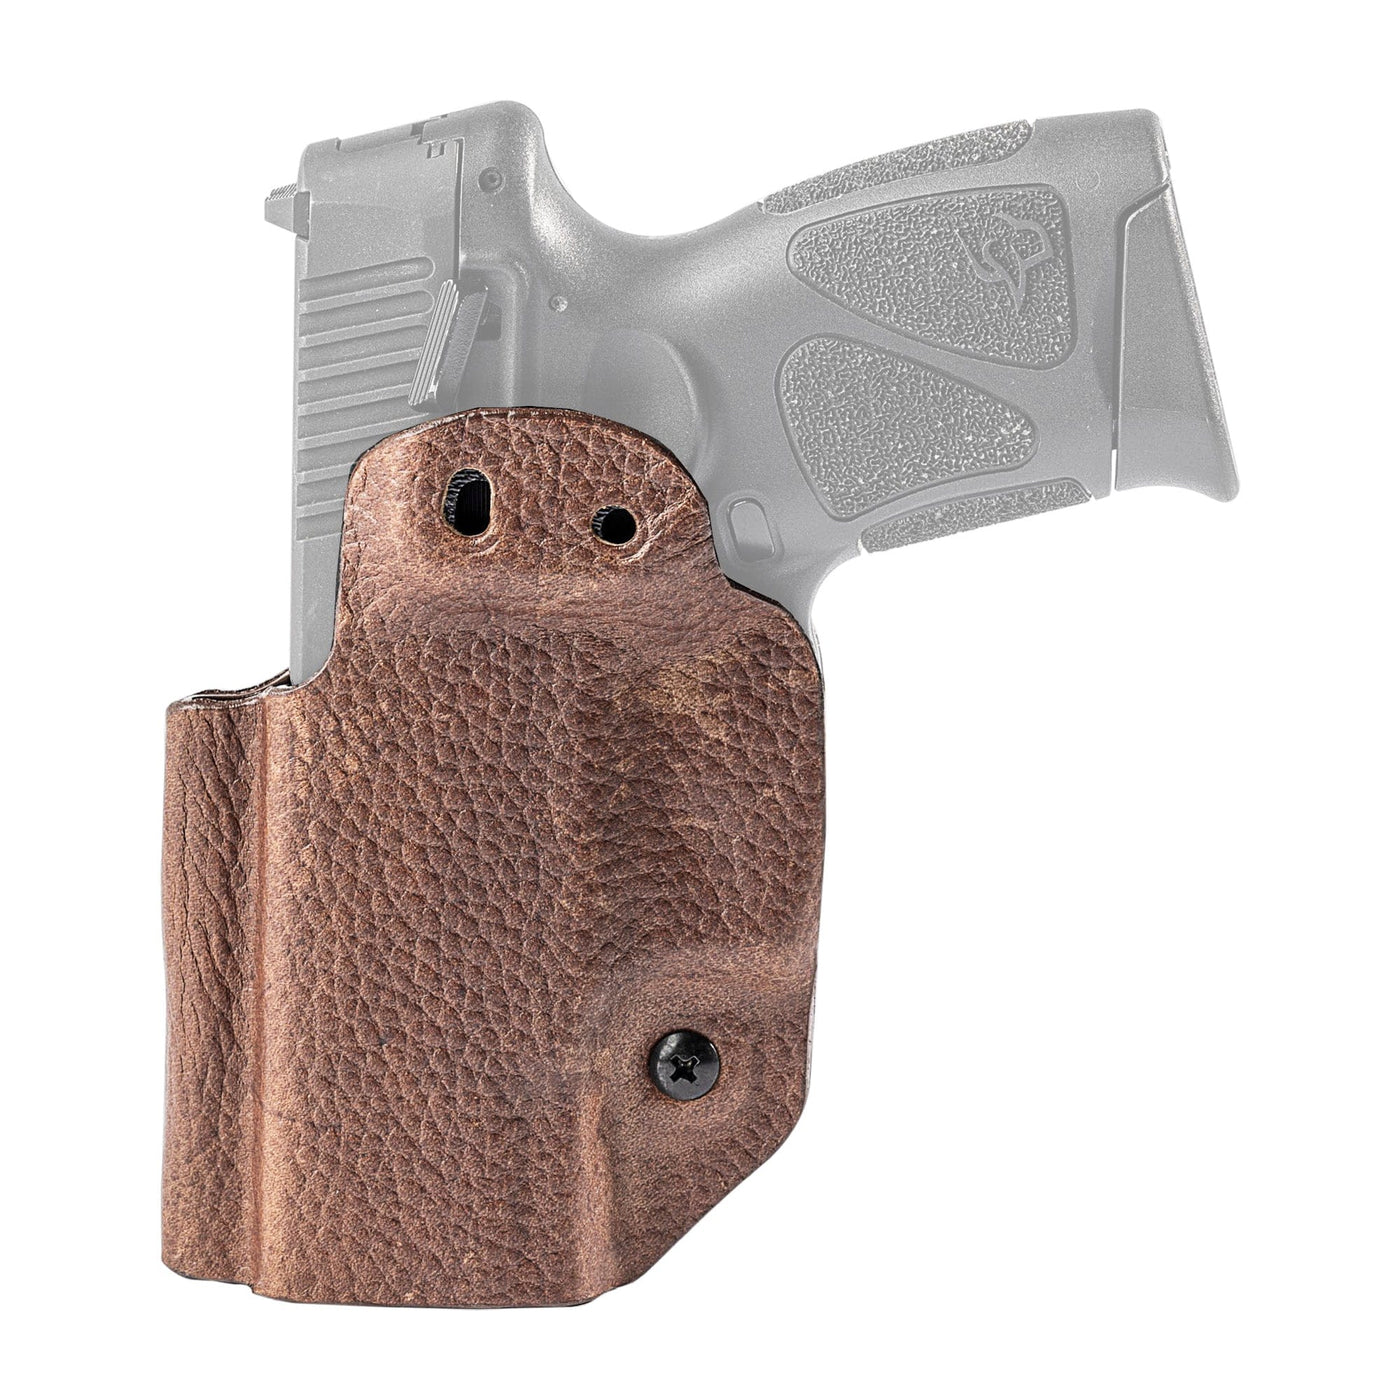 Mission First Tactical Mft Hybrid Holster Taurus G4 Holsters